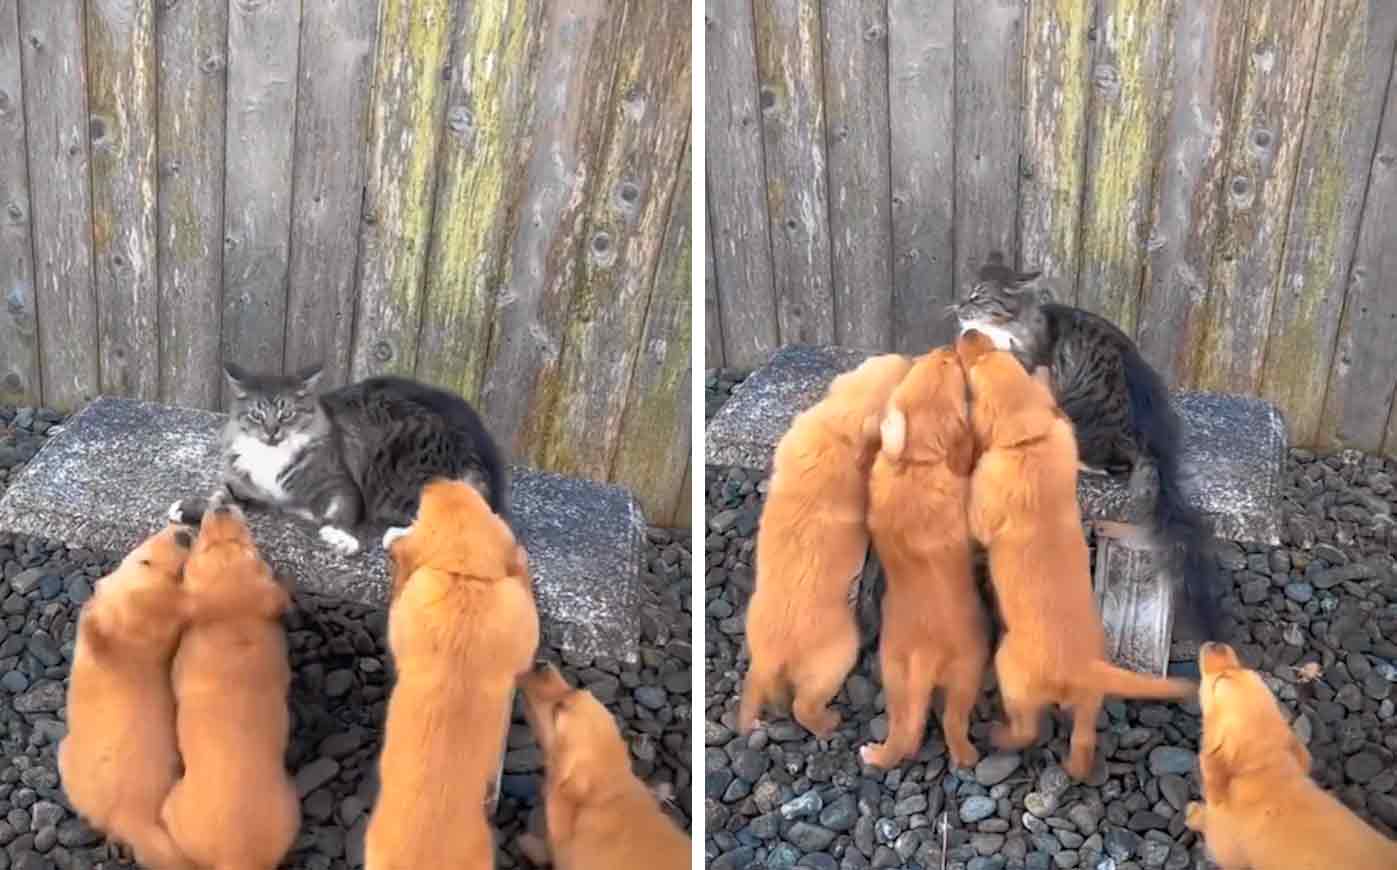 Hilarious video: Fearless cat faces an attack of adorable golden retriever puppies. Photo: Instagram reproduction
